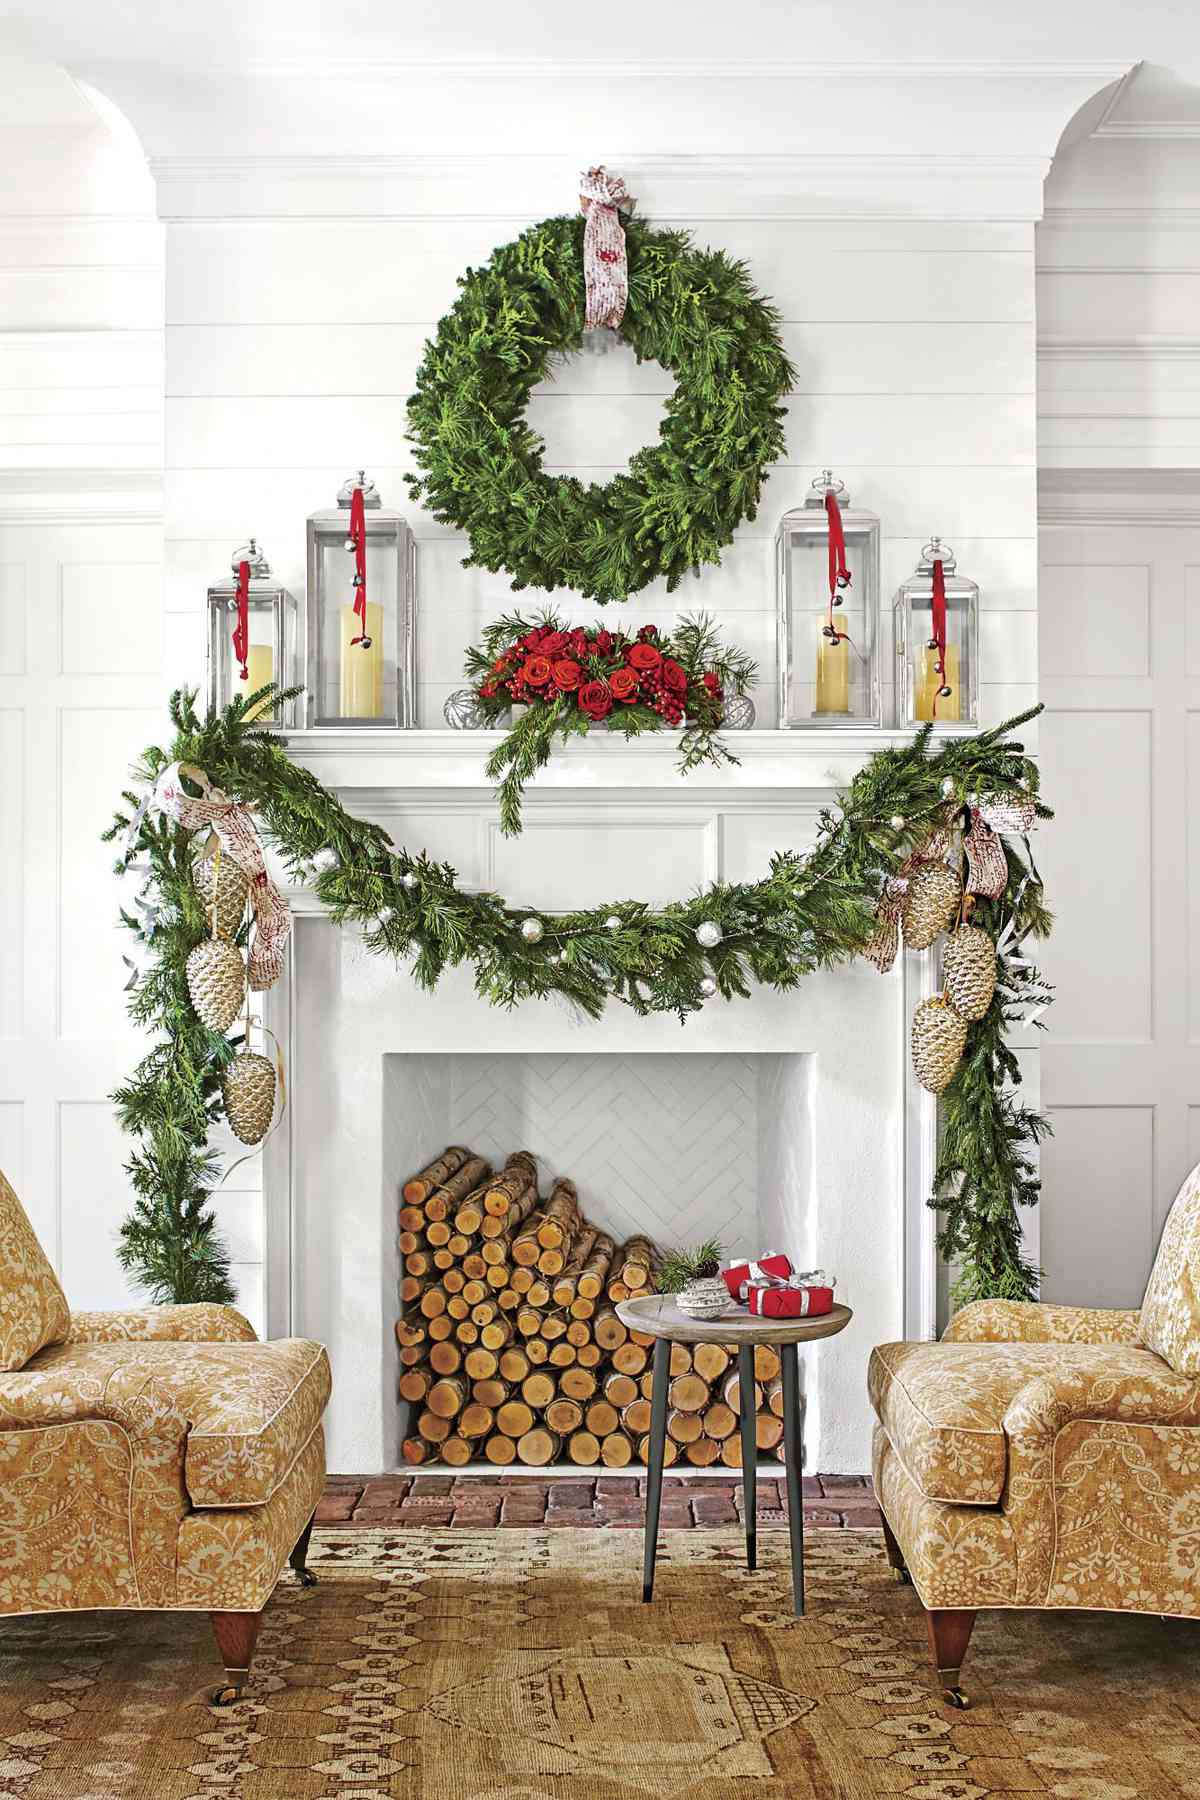 Red and Silver Greenery Display Over Mantel